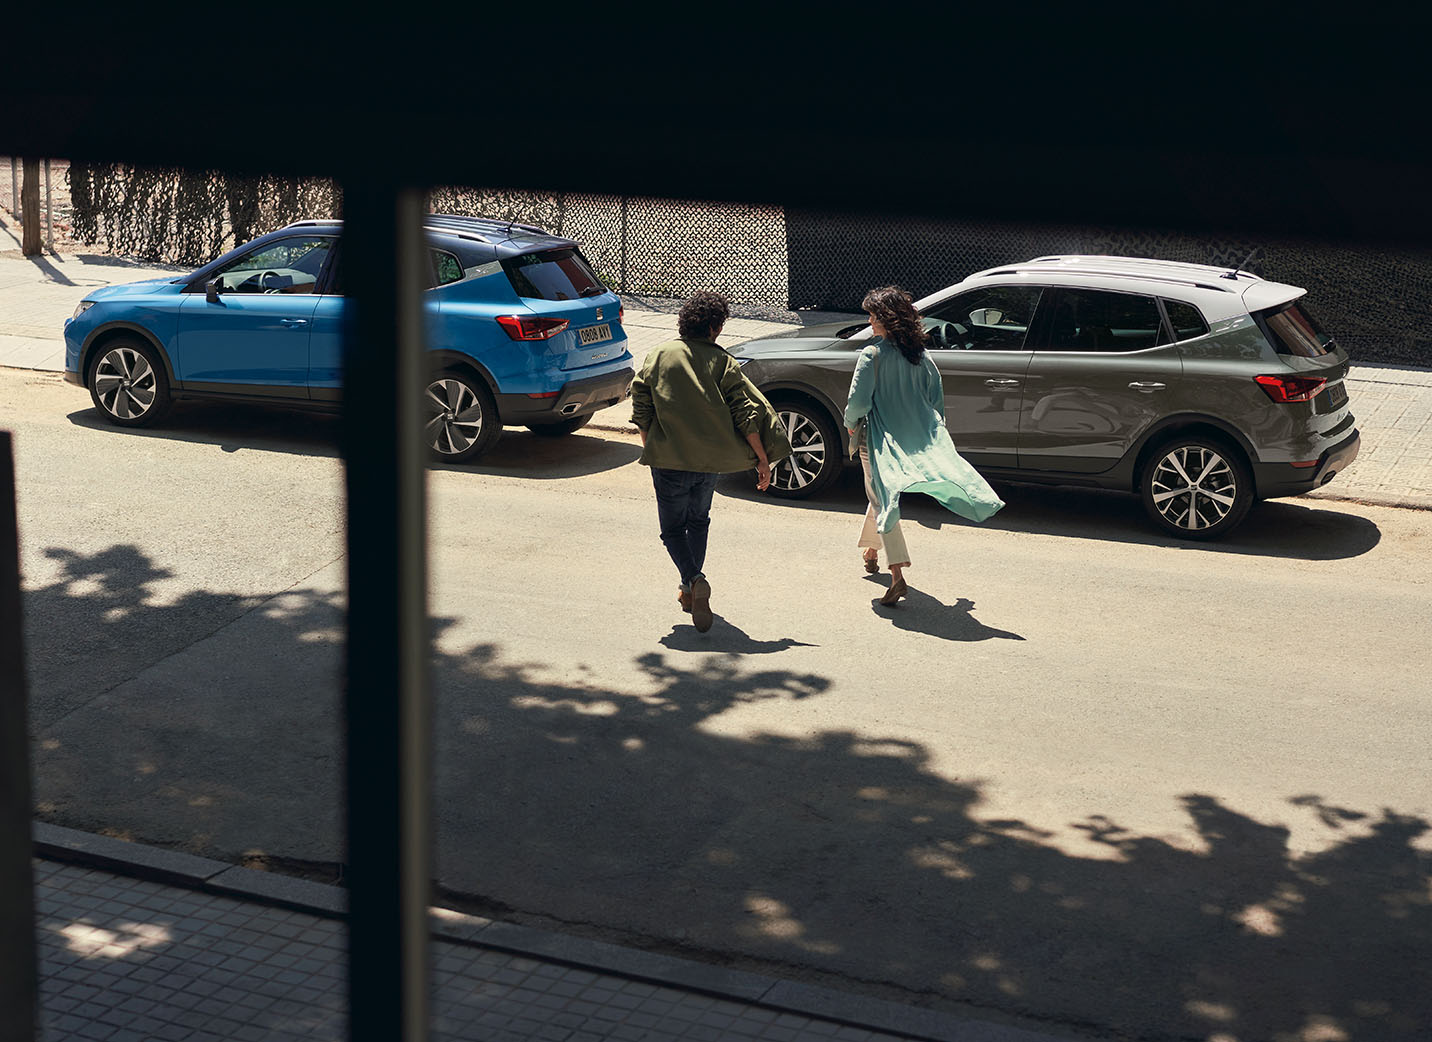 Sunny street scene where a man and a woman are walking towards two SEAT Arona 2024 cars, one blue and one grey parked along the curb. The setting suggests a casual, everyday urban environment